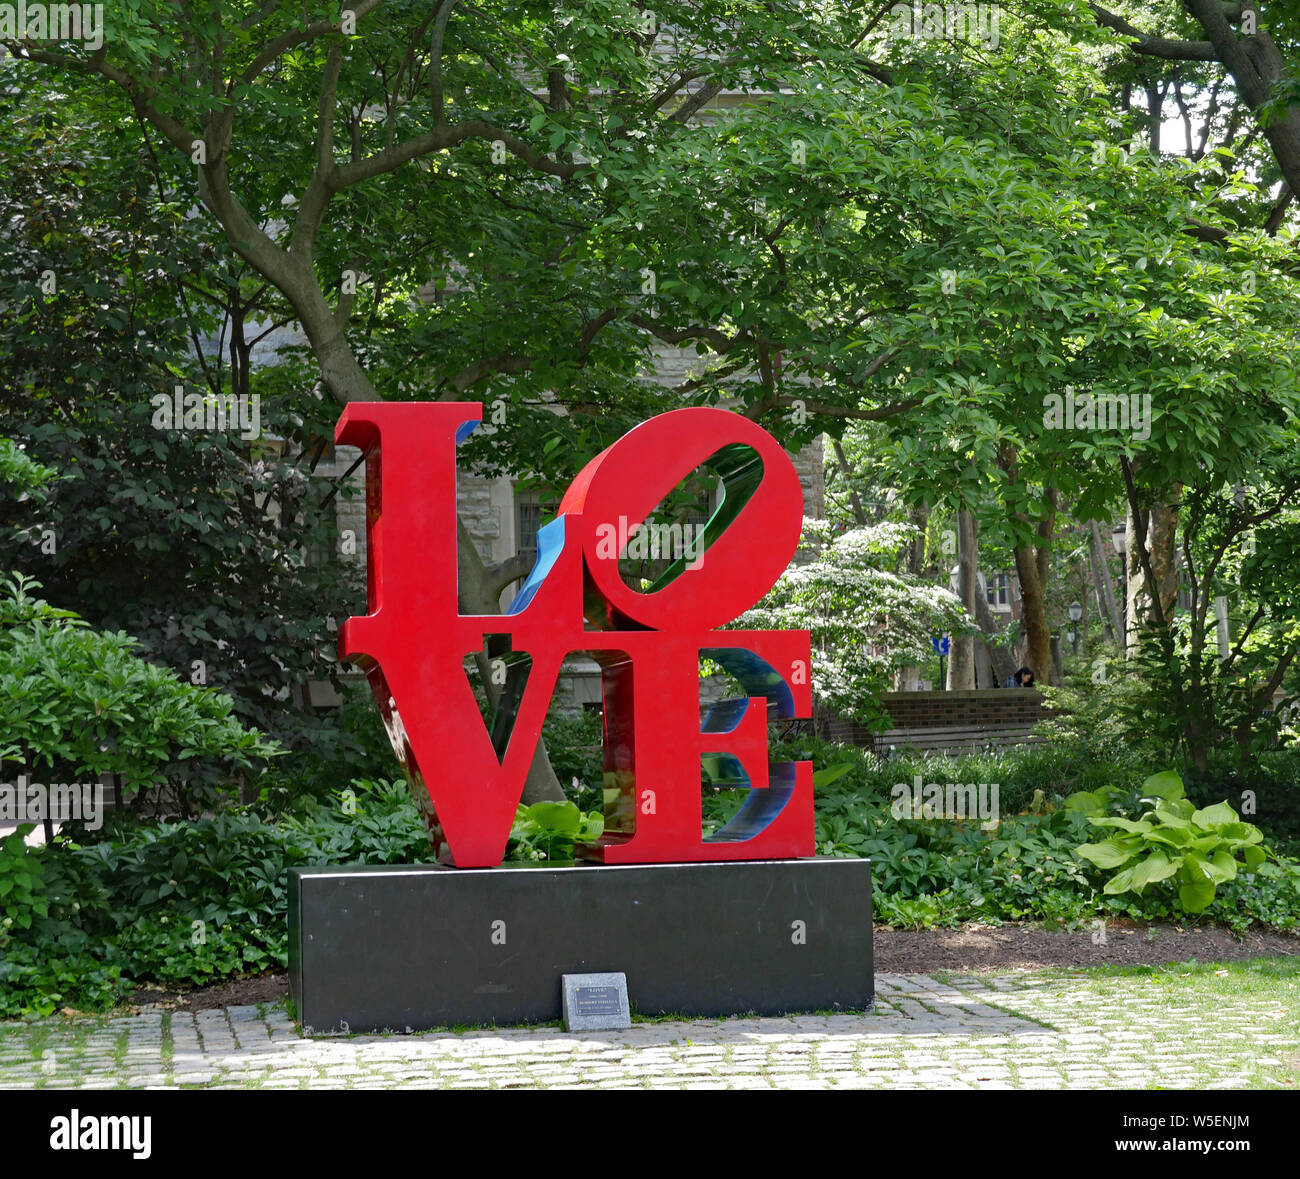 PHILADELPHIA - MAY 2019:  Pop art Love sculpture by Robert Indiana on the central campus of the University of Pennsylvania. Stock Photo